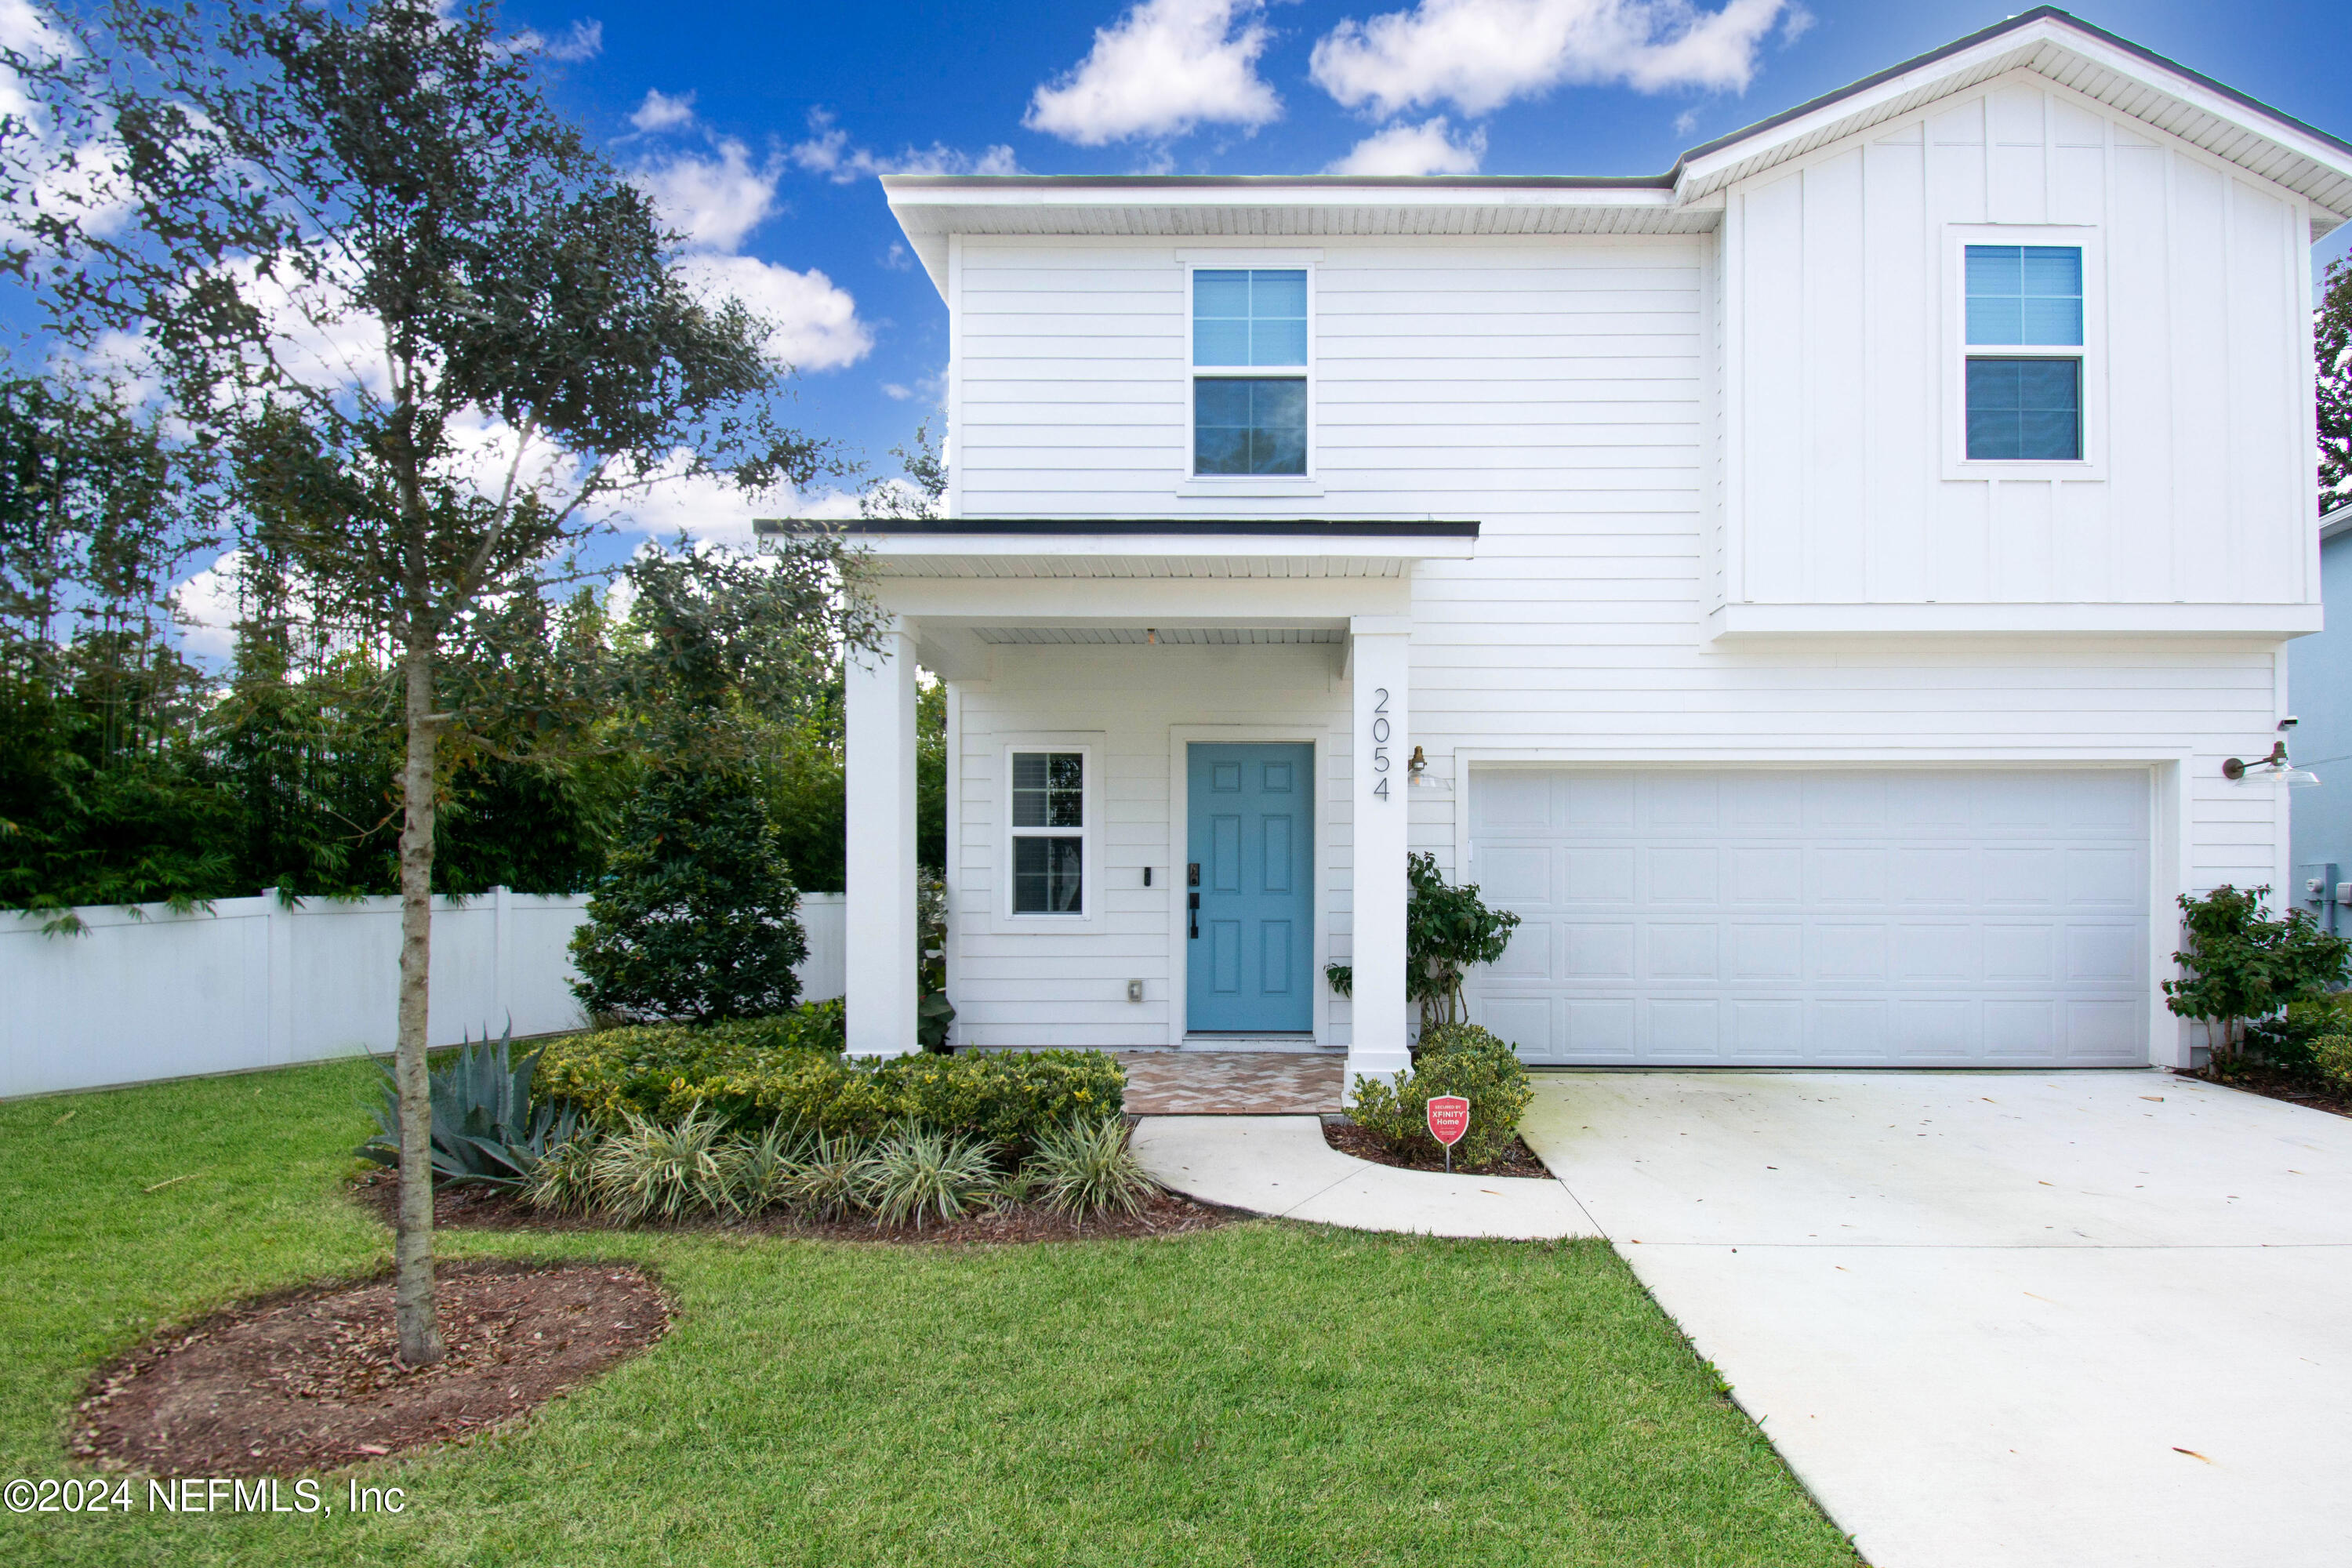 Jacksonville, FL home for sale located at 2054 DUTTON ISLAND OAKS Way, Jacksonville, FL 32233